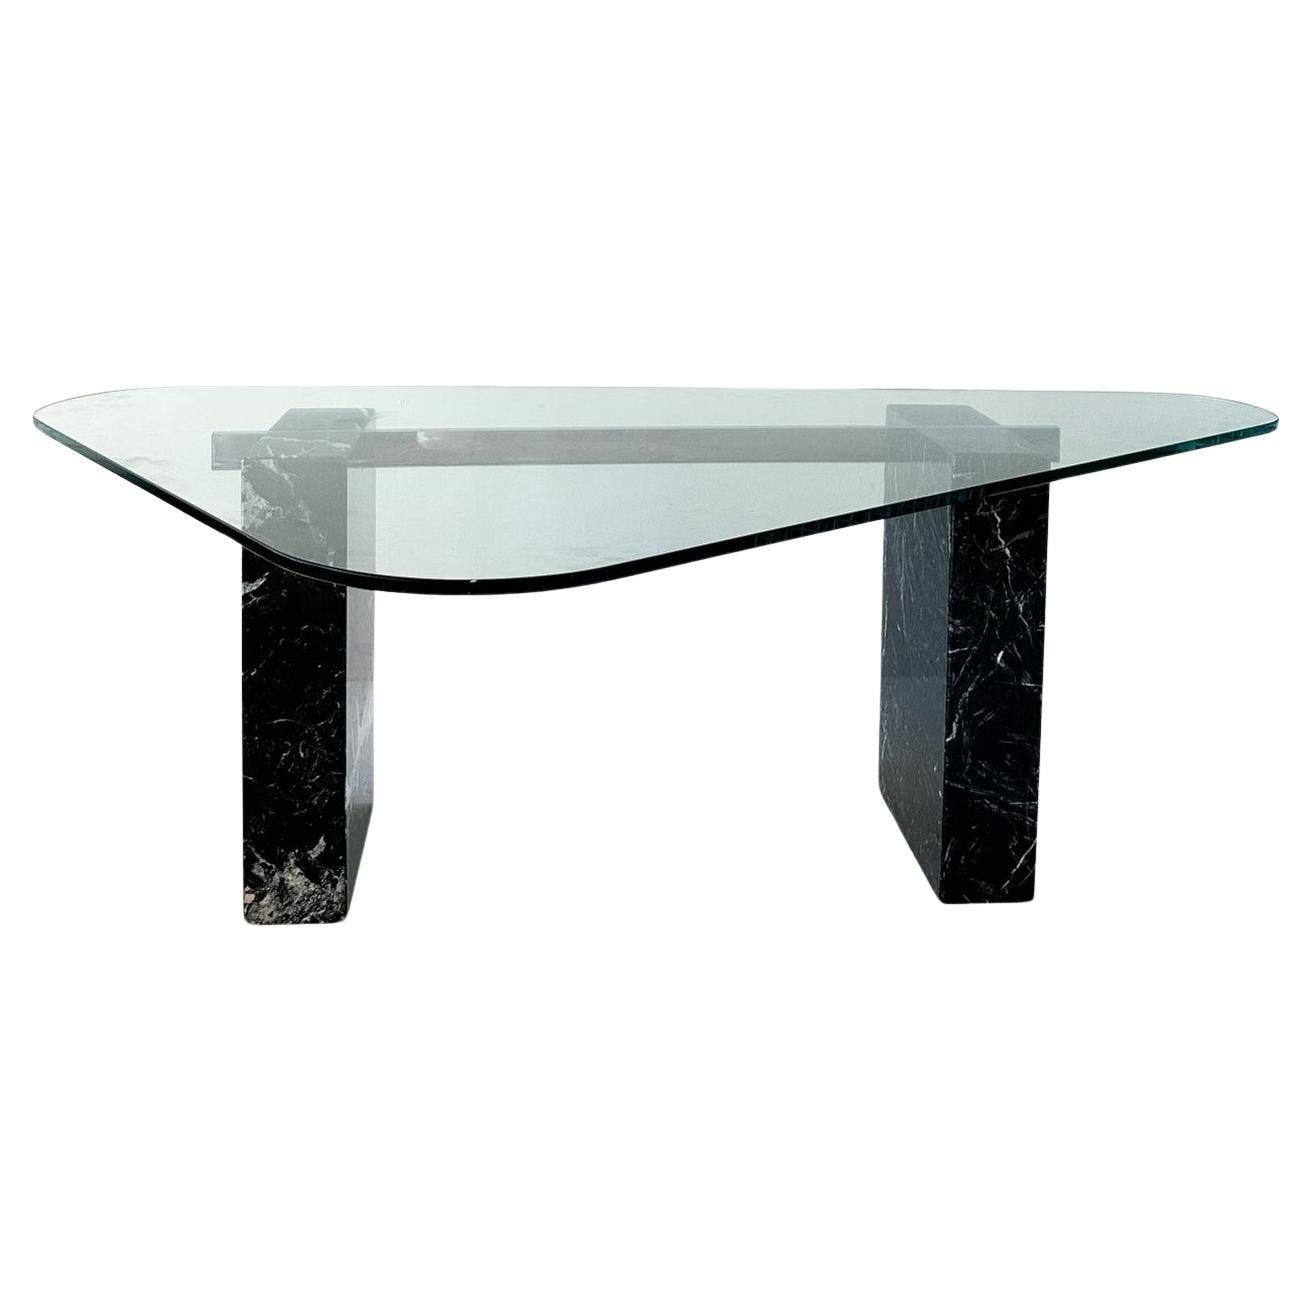 Postmodern Desk / Dining Table with Rounded Triangular Glass Top and Marble Legs For Sale